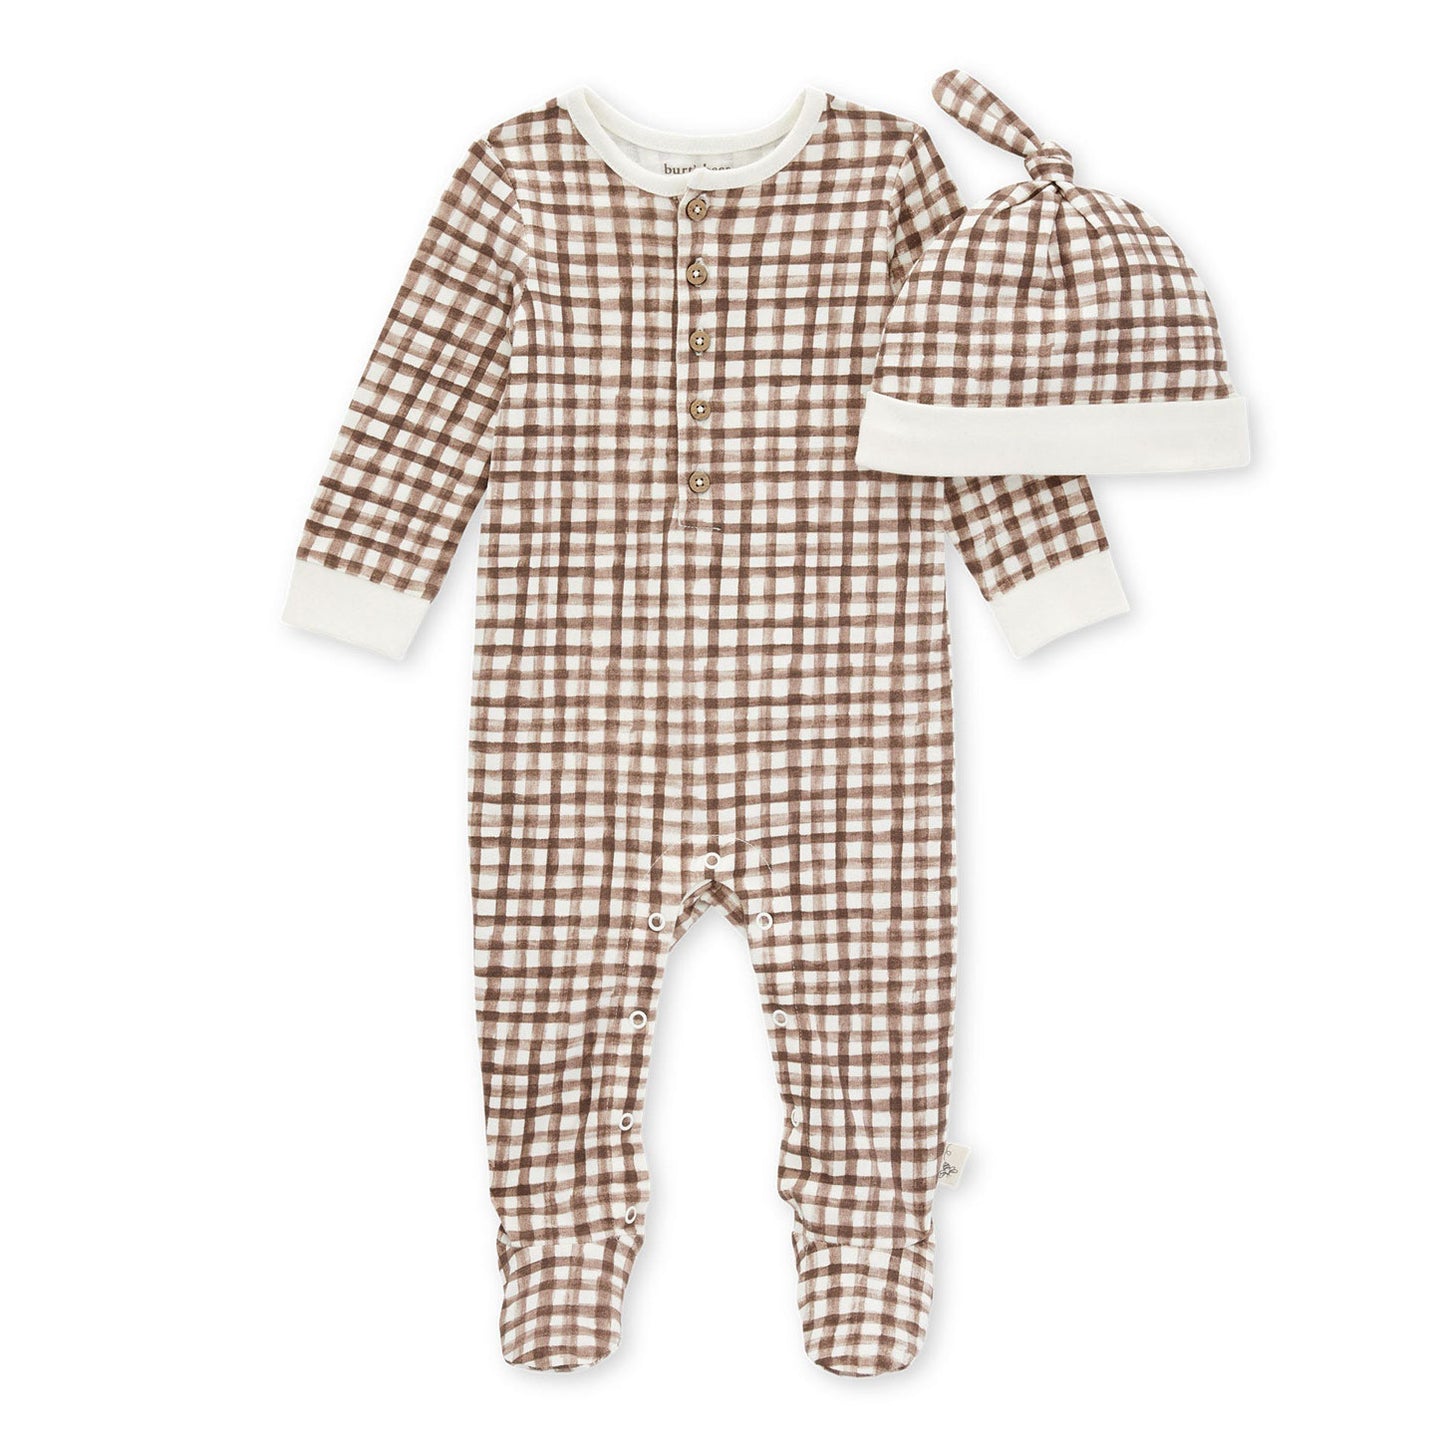 Burt's Bees Organic Cotton Footed Jumpsuit & Knot Top Hat Set - Micro Gingham - Chestnut